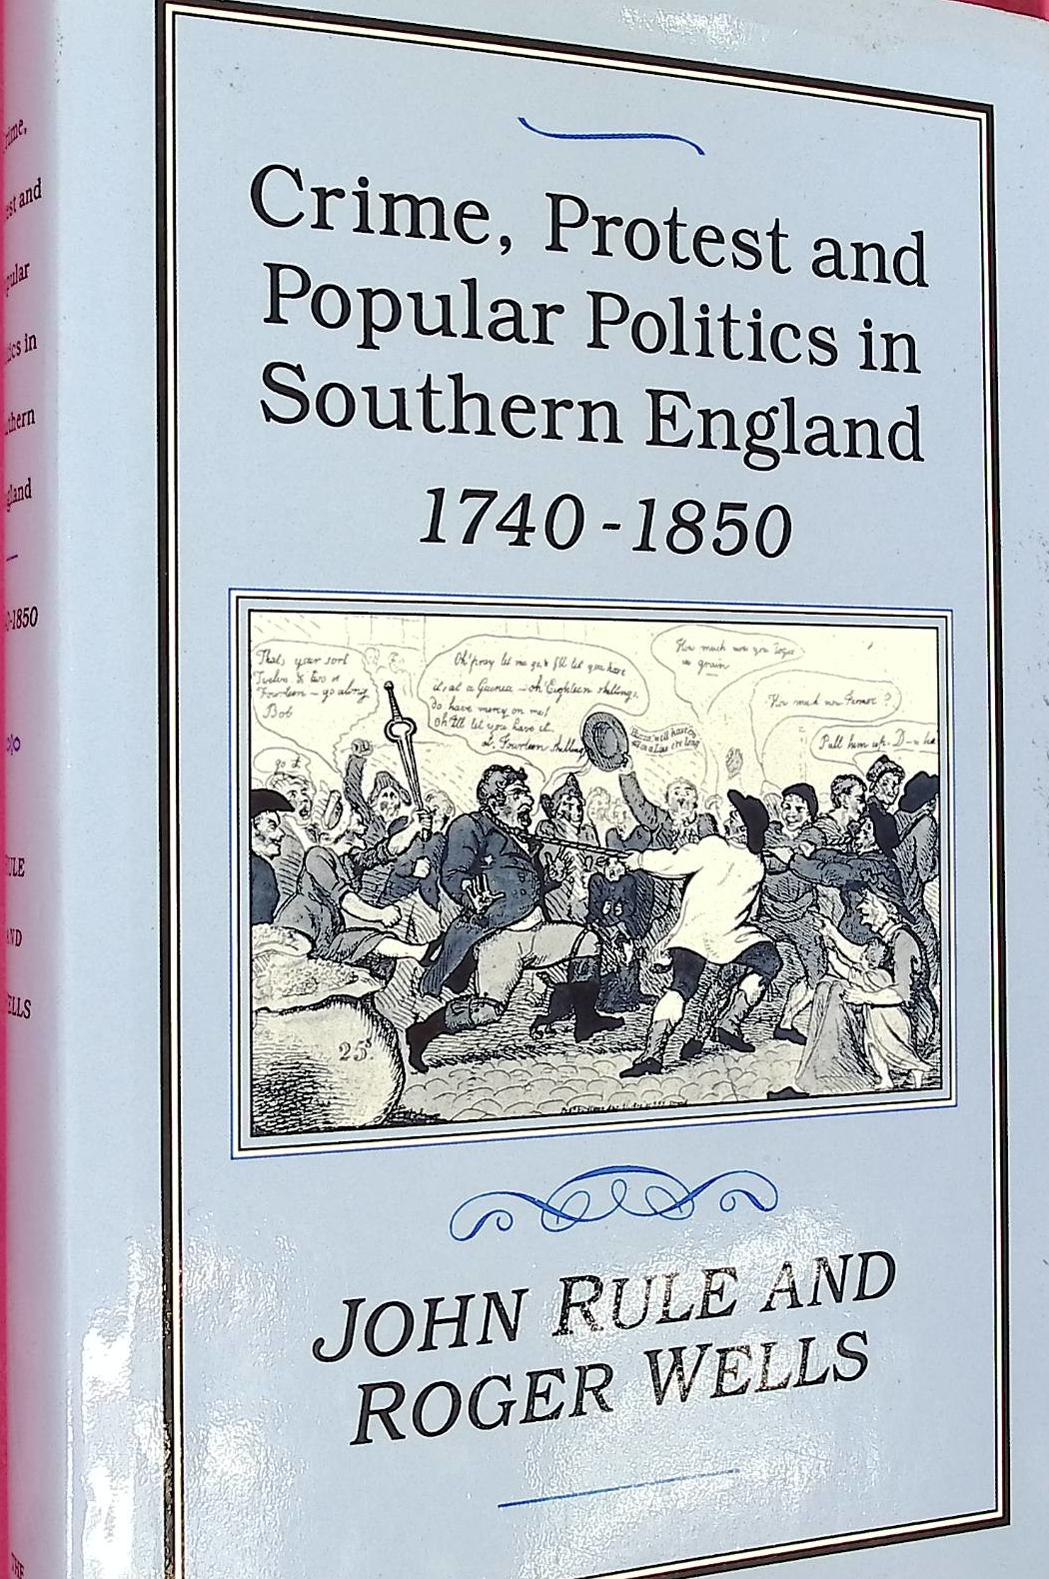 Crime, Protest and Popular Politics in Southern England 1740 - 1850